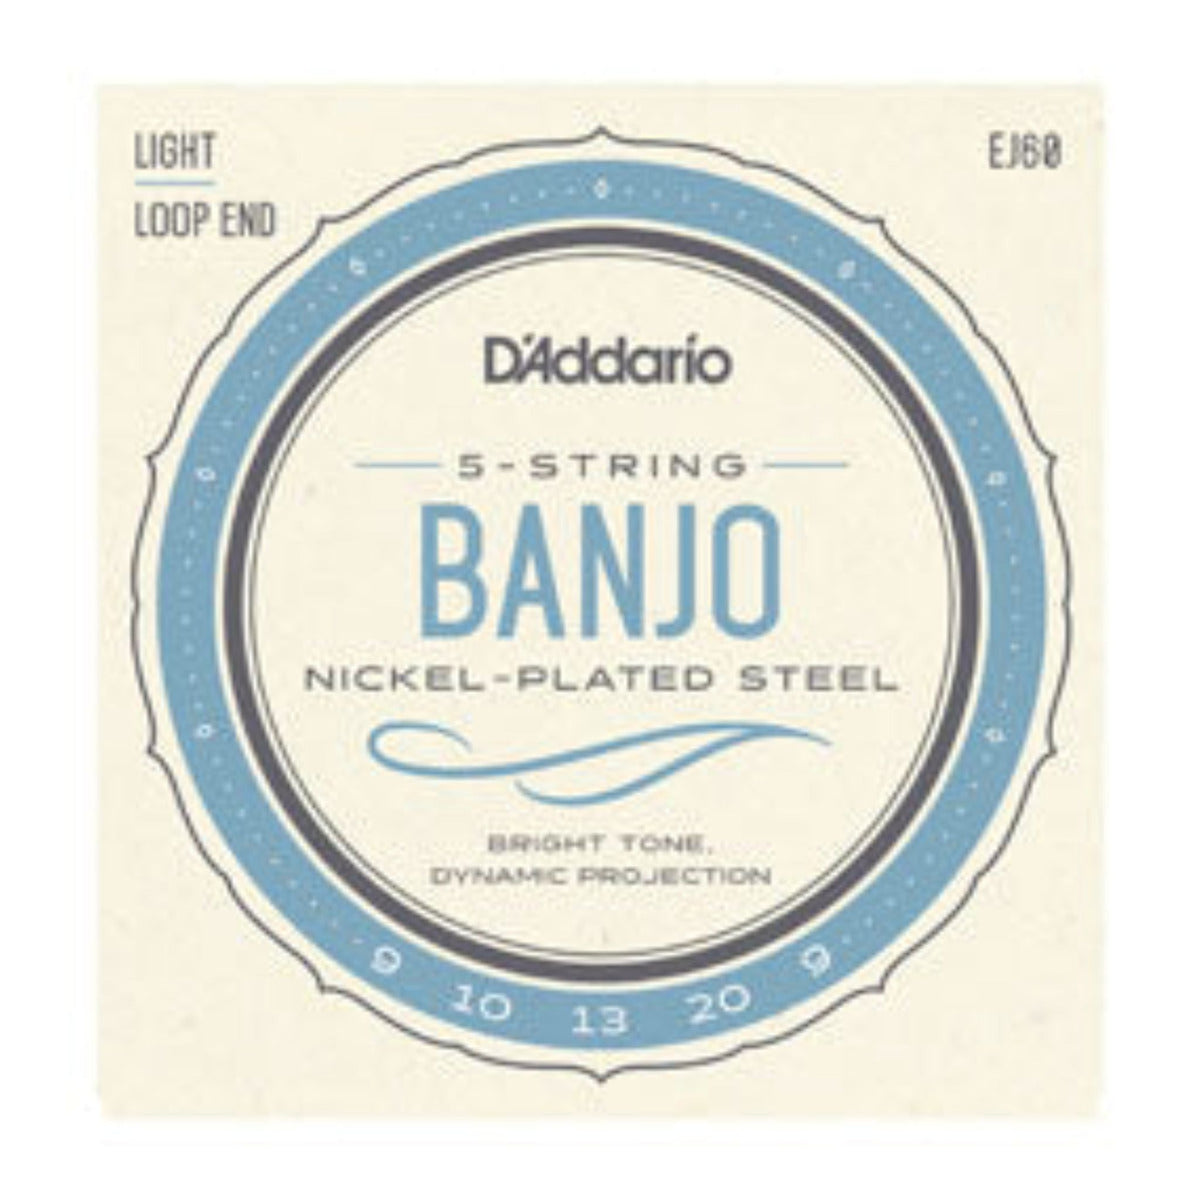 EJ60, one D&#39;Addario&#39;s best selling 5-string banjo sets, offers light playing tension for comfortable playing feel and brilliant tone.